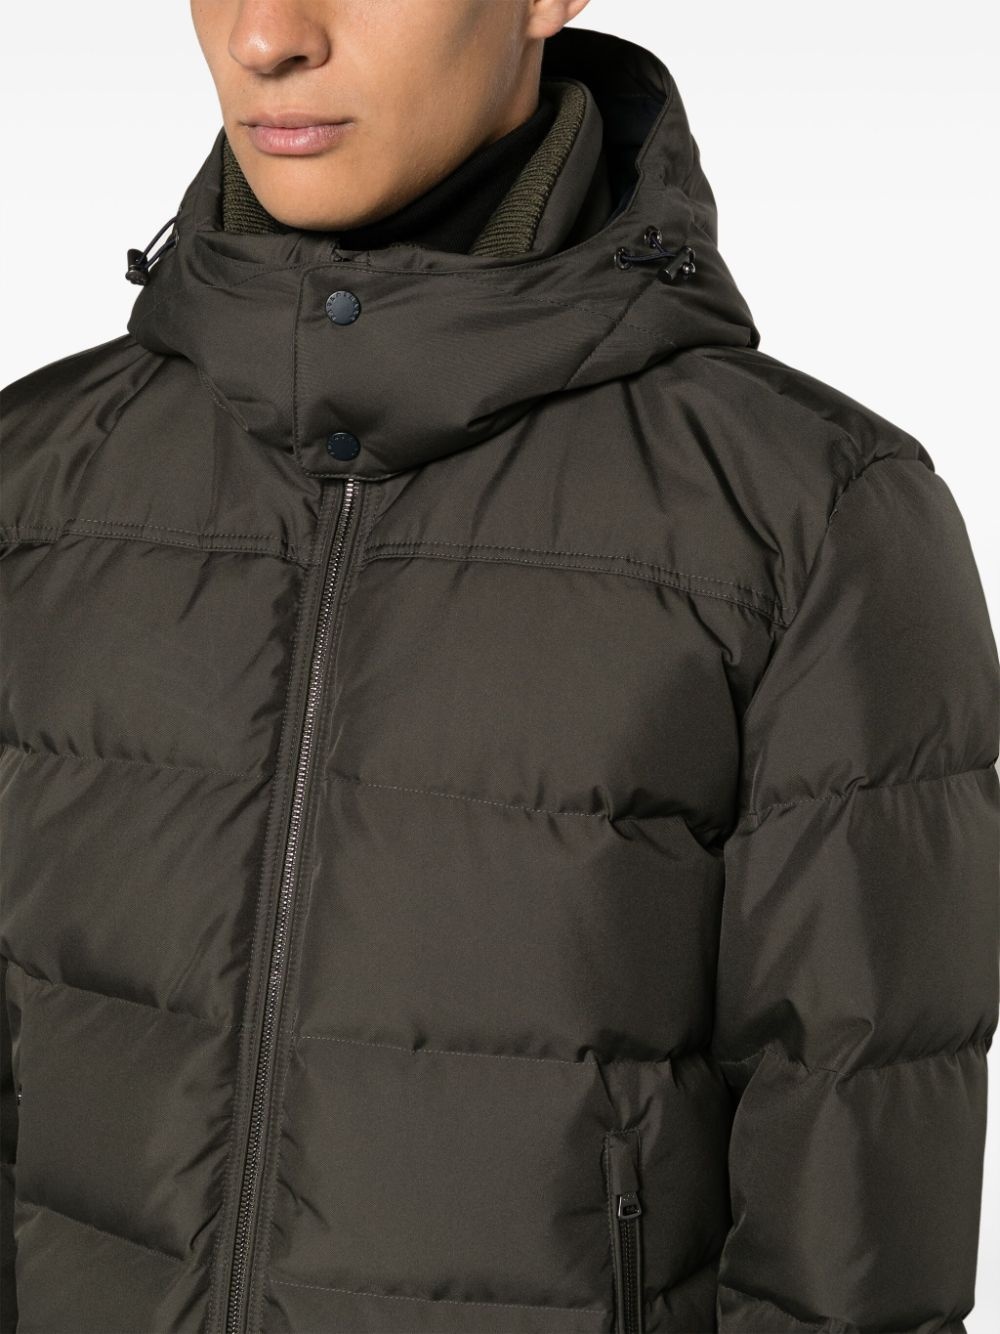 Save the Sea down jacket - 5